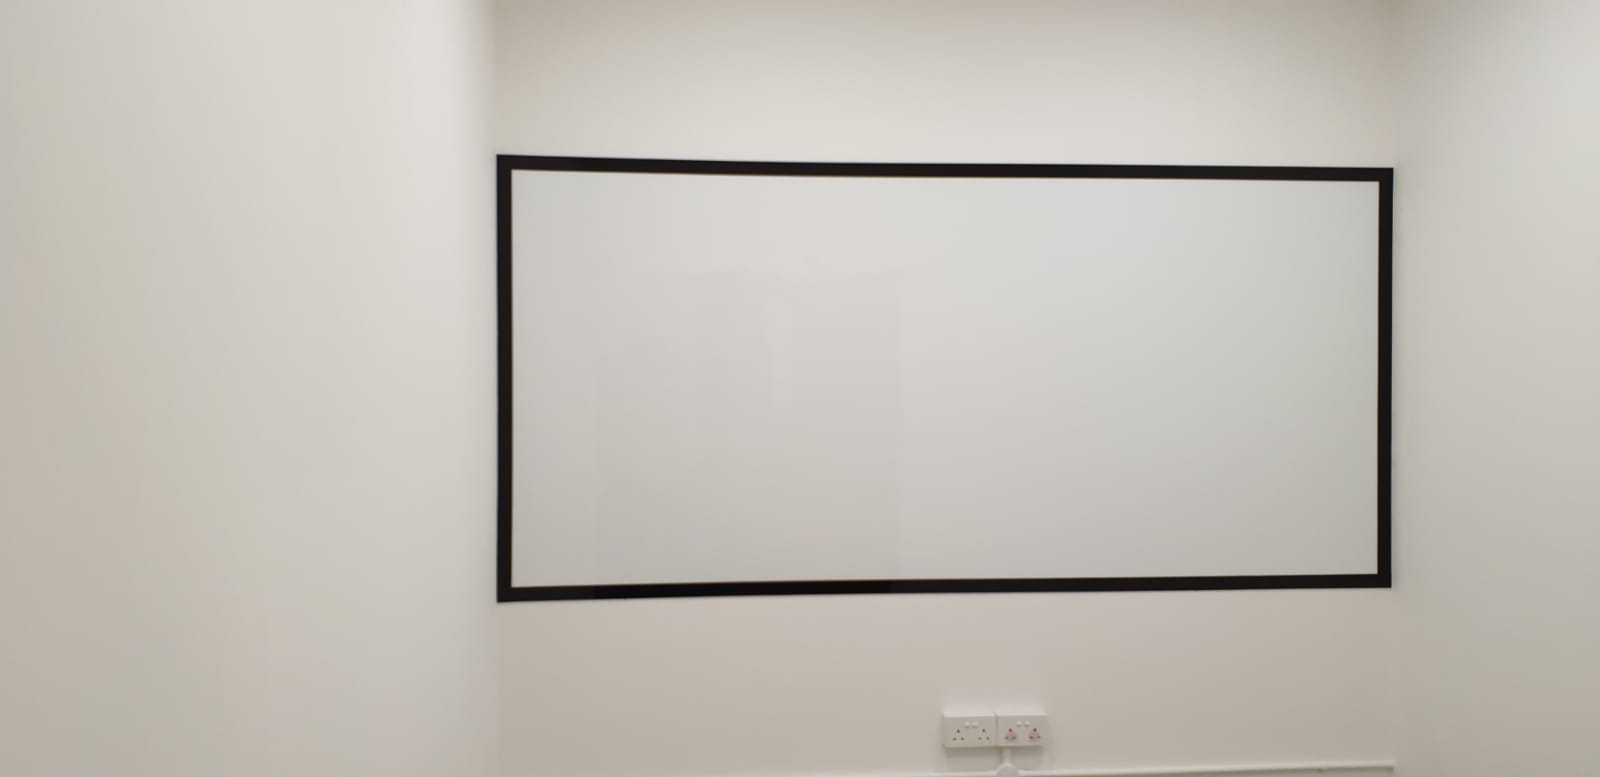 Whiteboard with frame